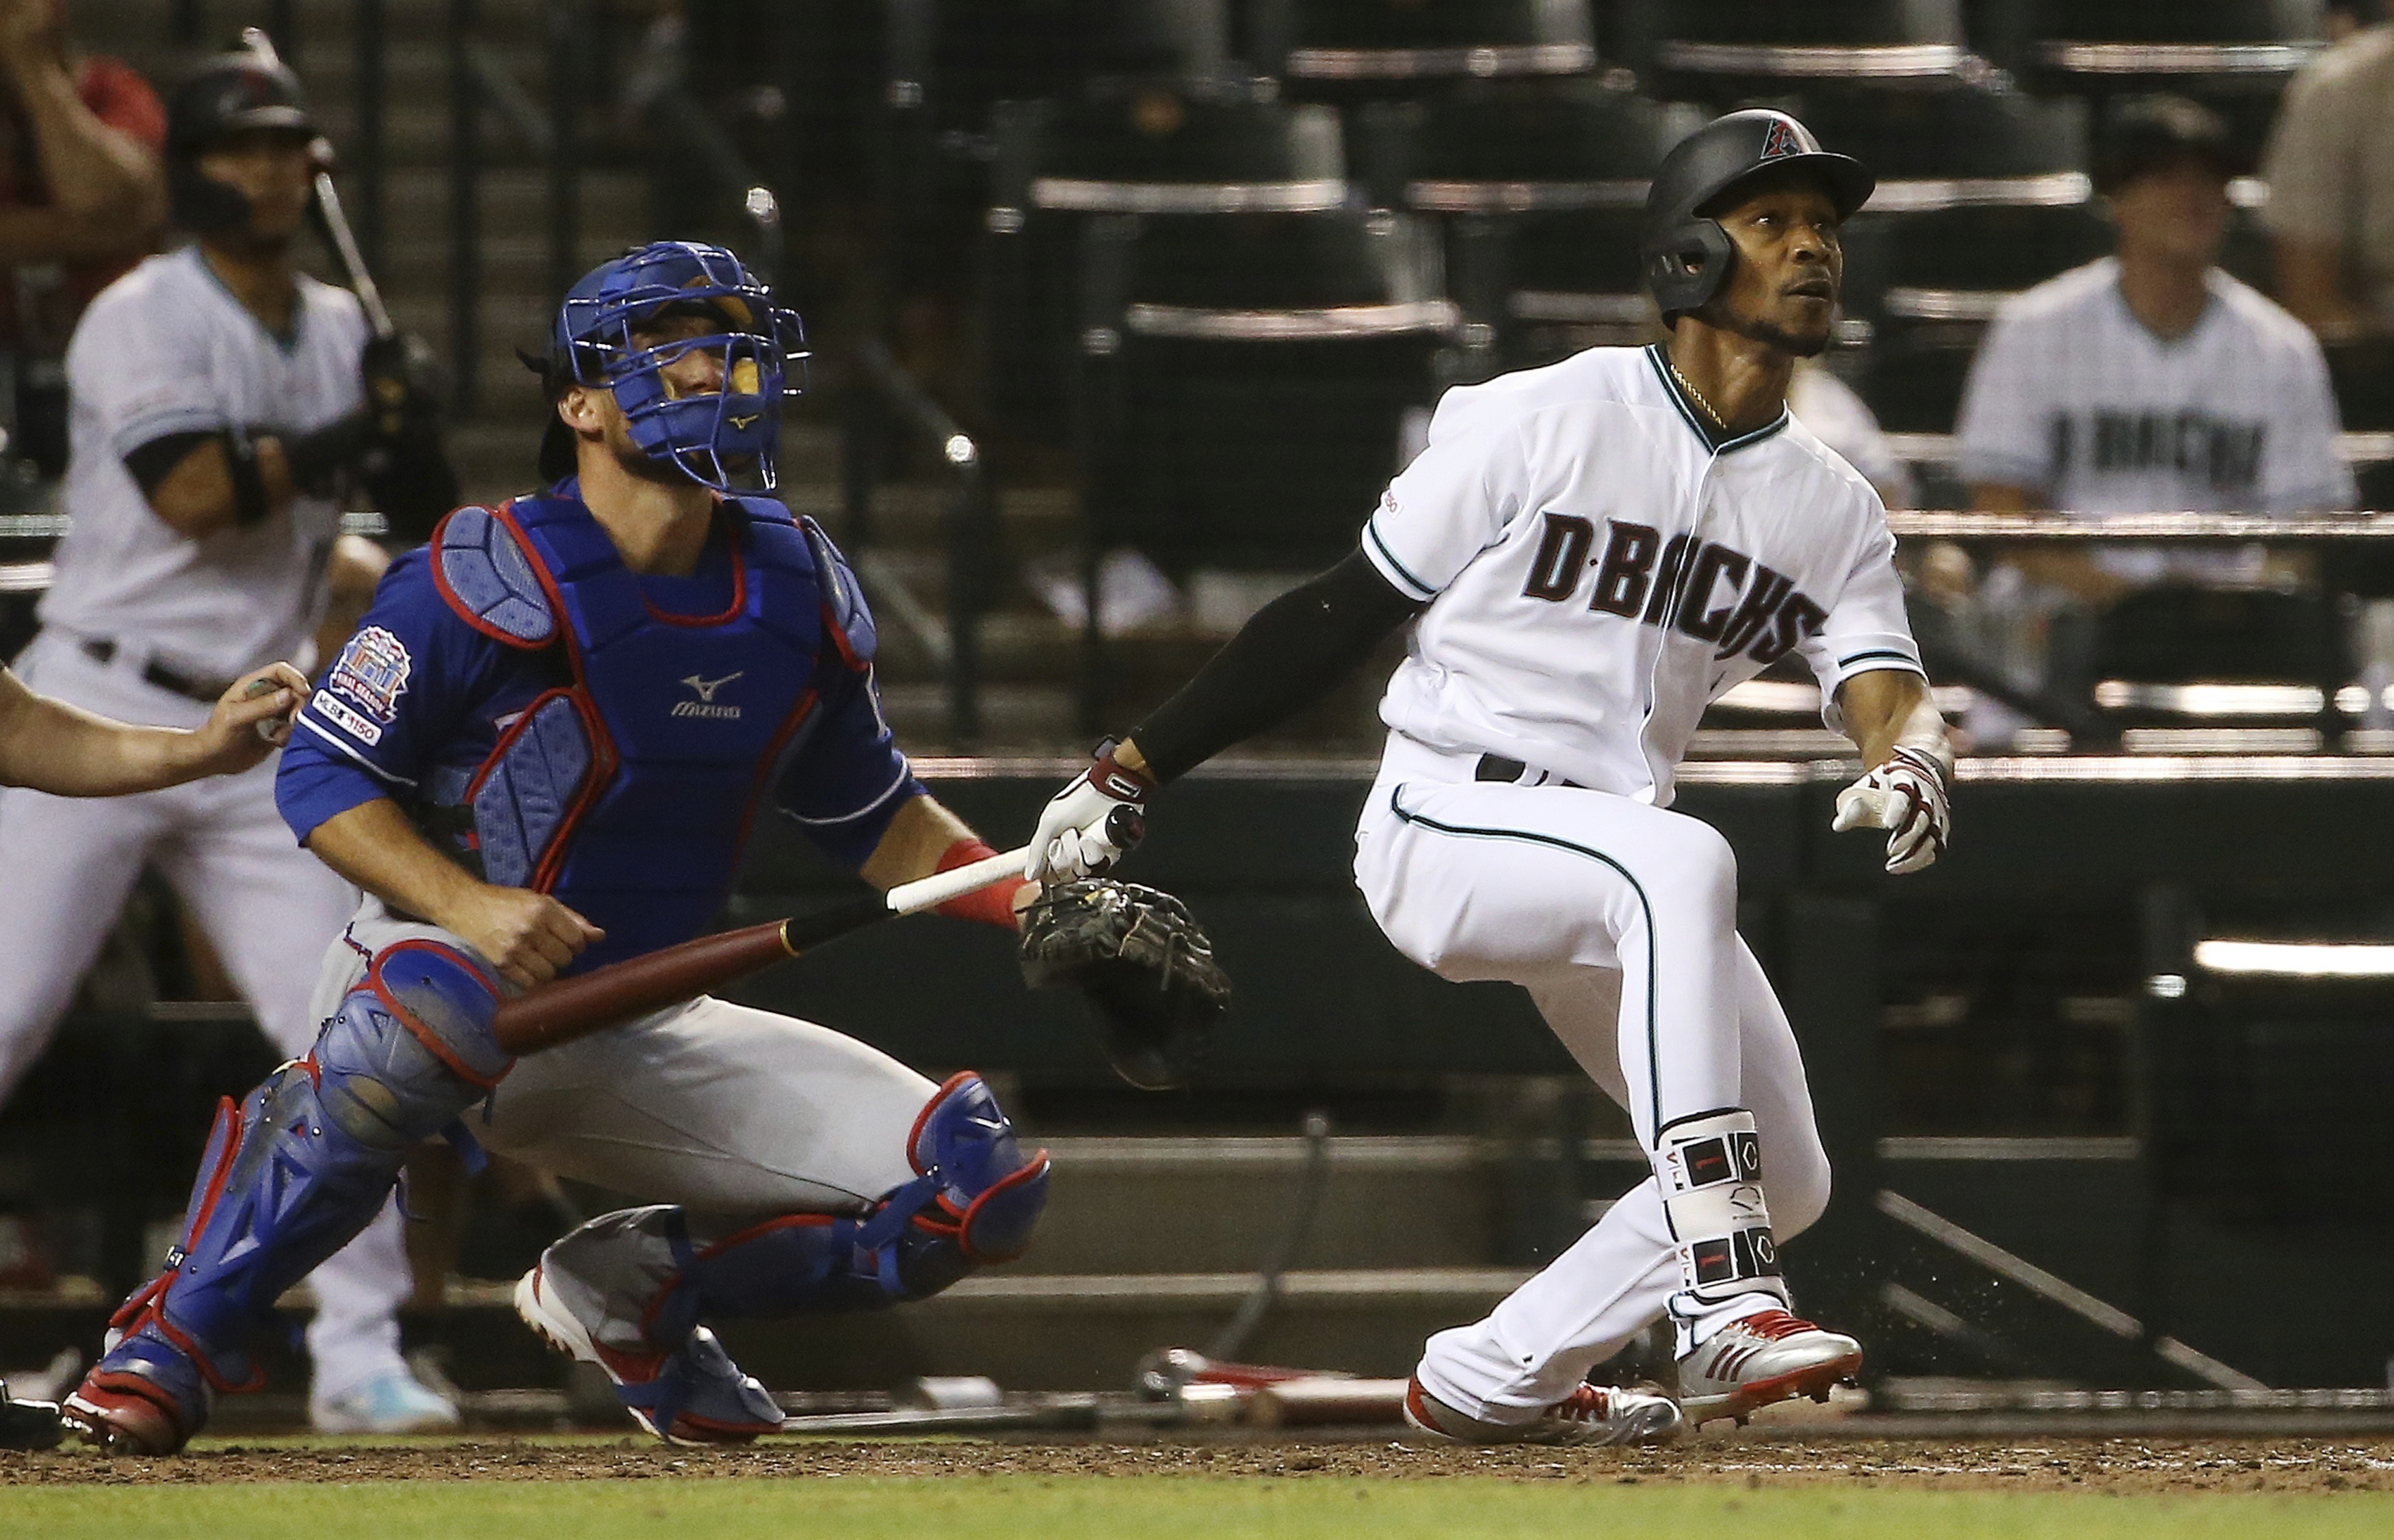 Dyson’s pinch-hit HR in 9th rallies D-backs past Rangers 5-4